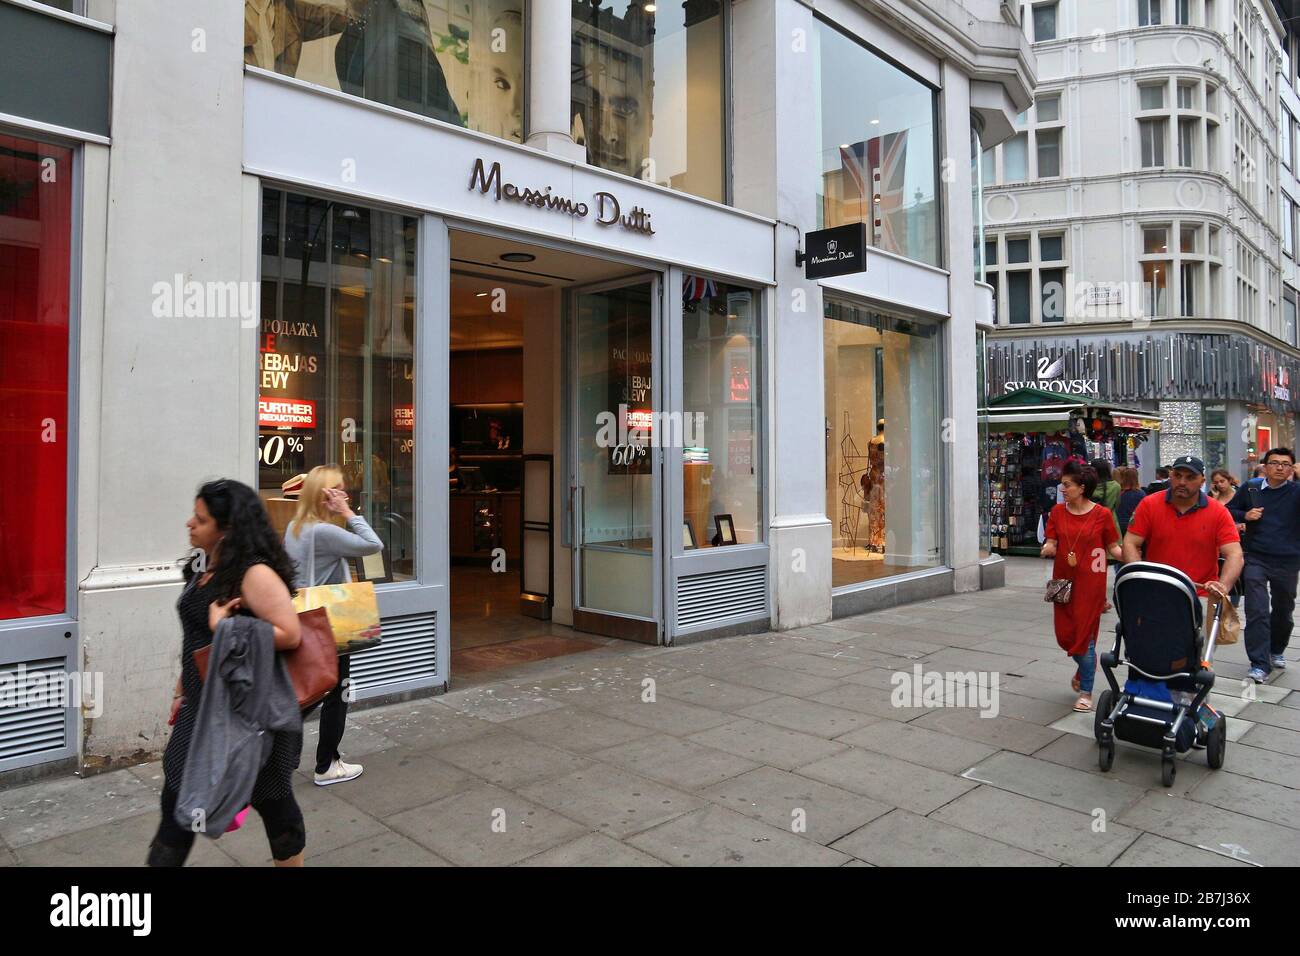 LONDON, UK - JULY 6, 2016: People shop at Massimo Dutti, Oxford Street in  London. Oxford Street has approximately half a million daily visitors and  32 Stock Photo - Alamy